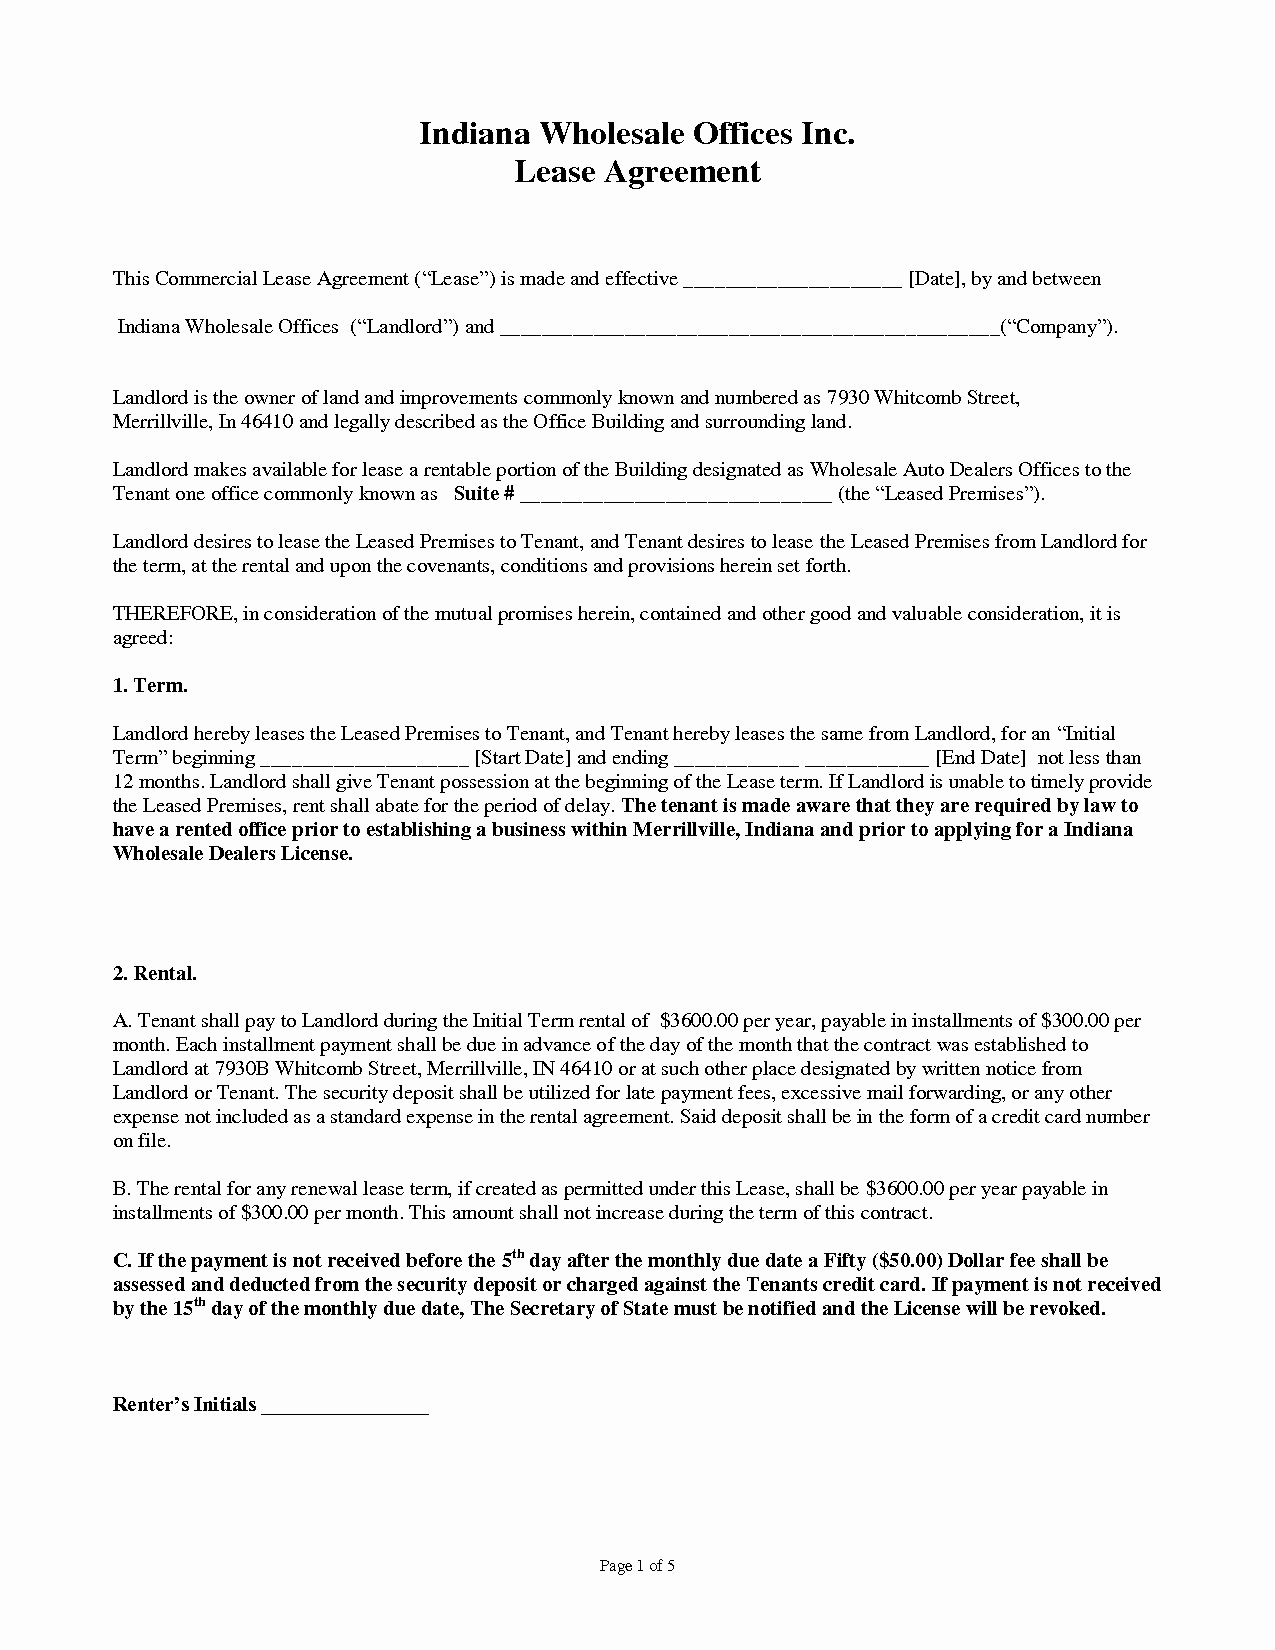 Commercial Lease Agreement Template Free Unique 13 Mercial Lease Agreement Templates Excel Pdf formats